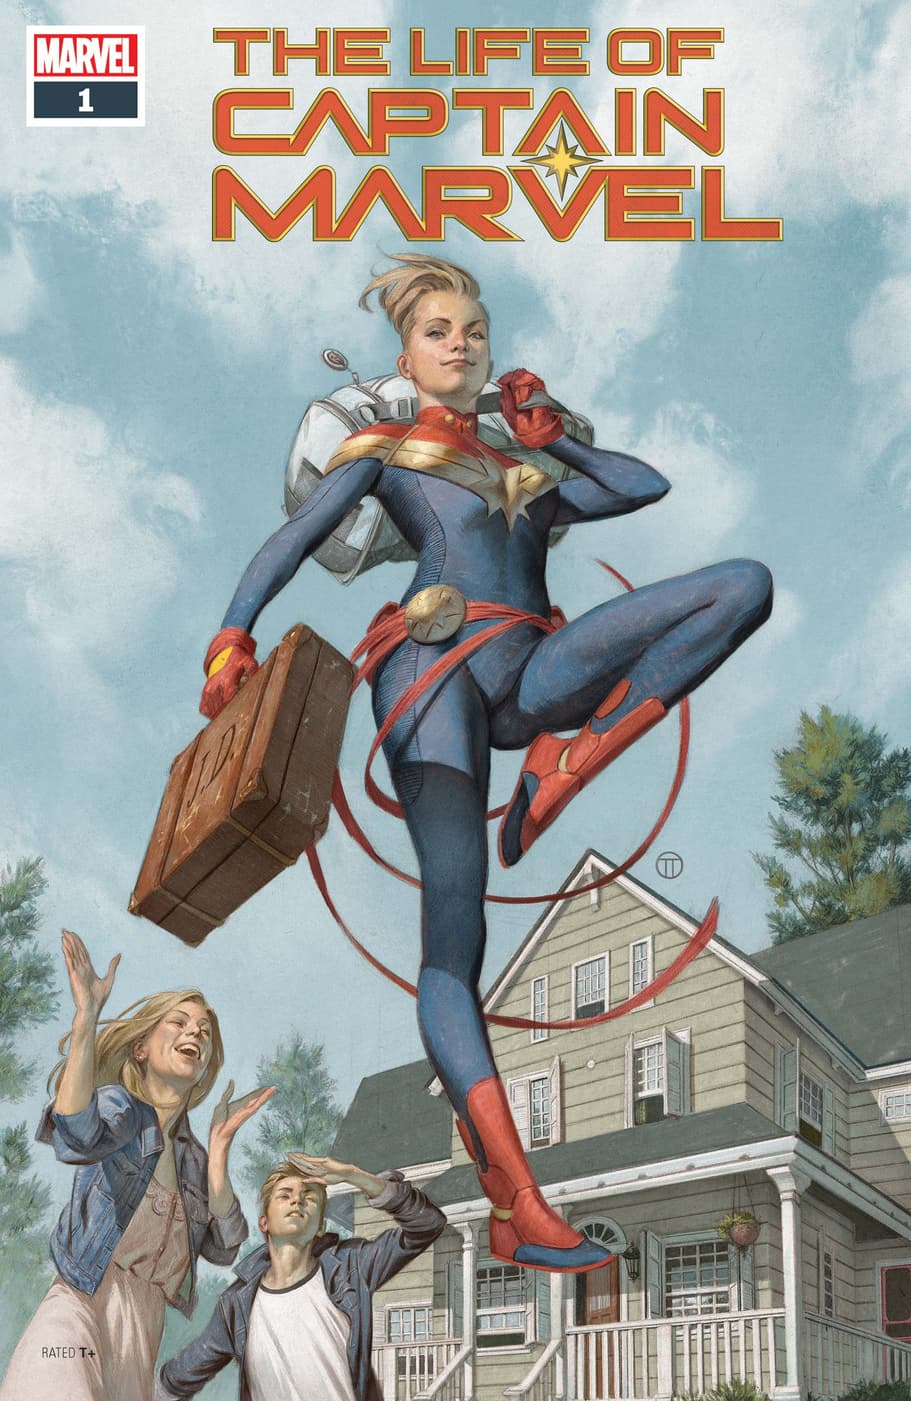 THE LIFE OF CAPTAIN MARVEL (2018)